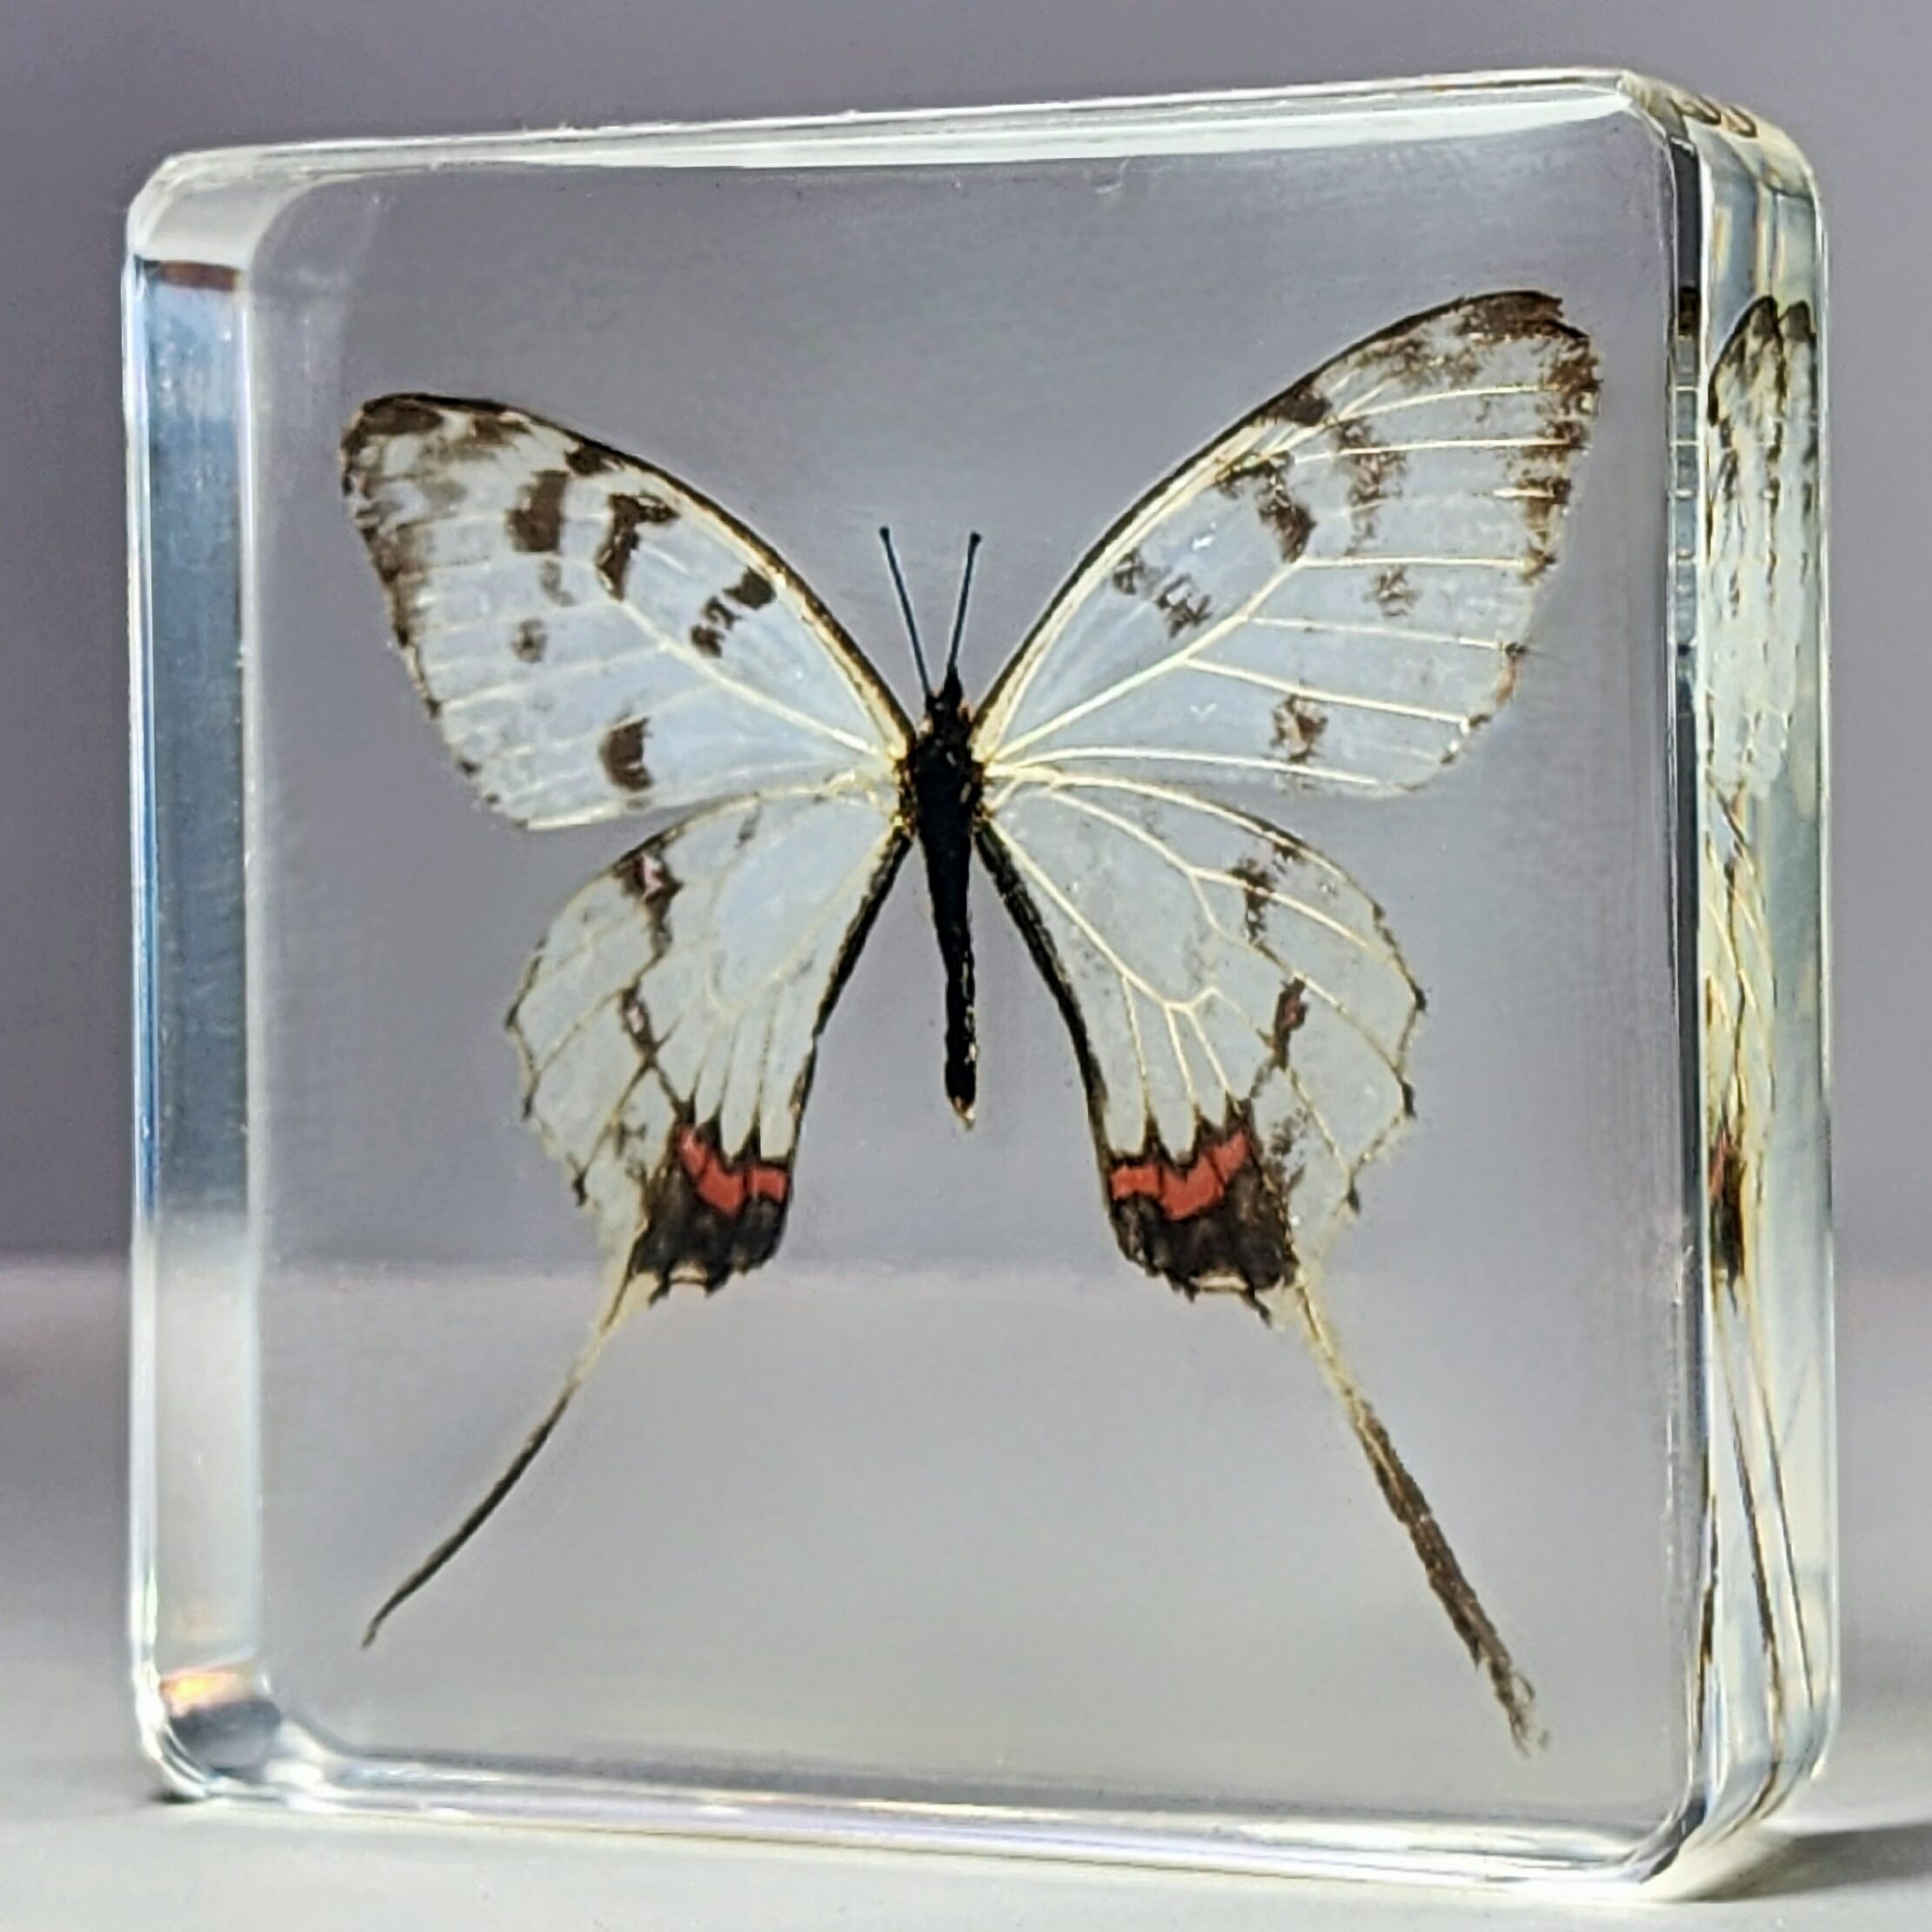 Dragon Swallowtail Butterfly in Resin, Preserved Butterflies, Insects in Resin